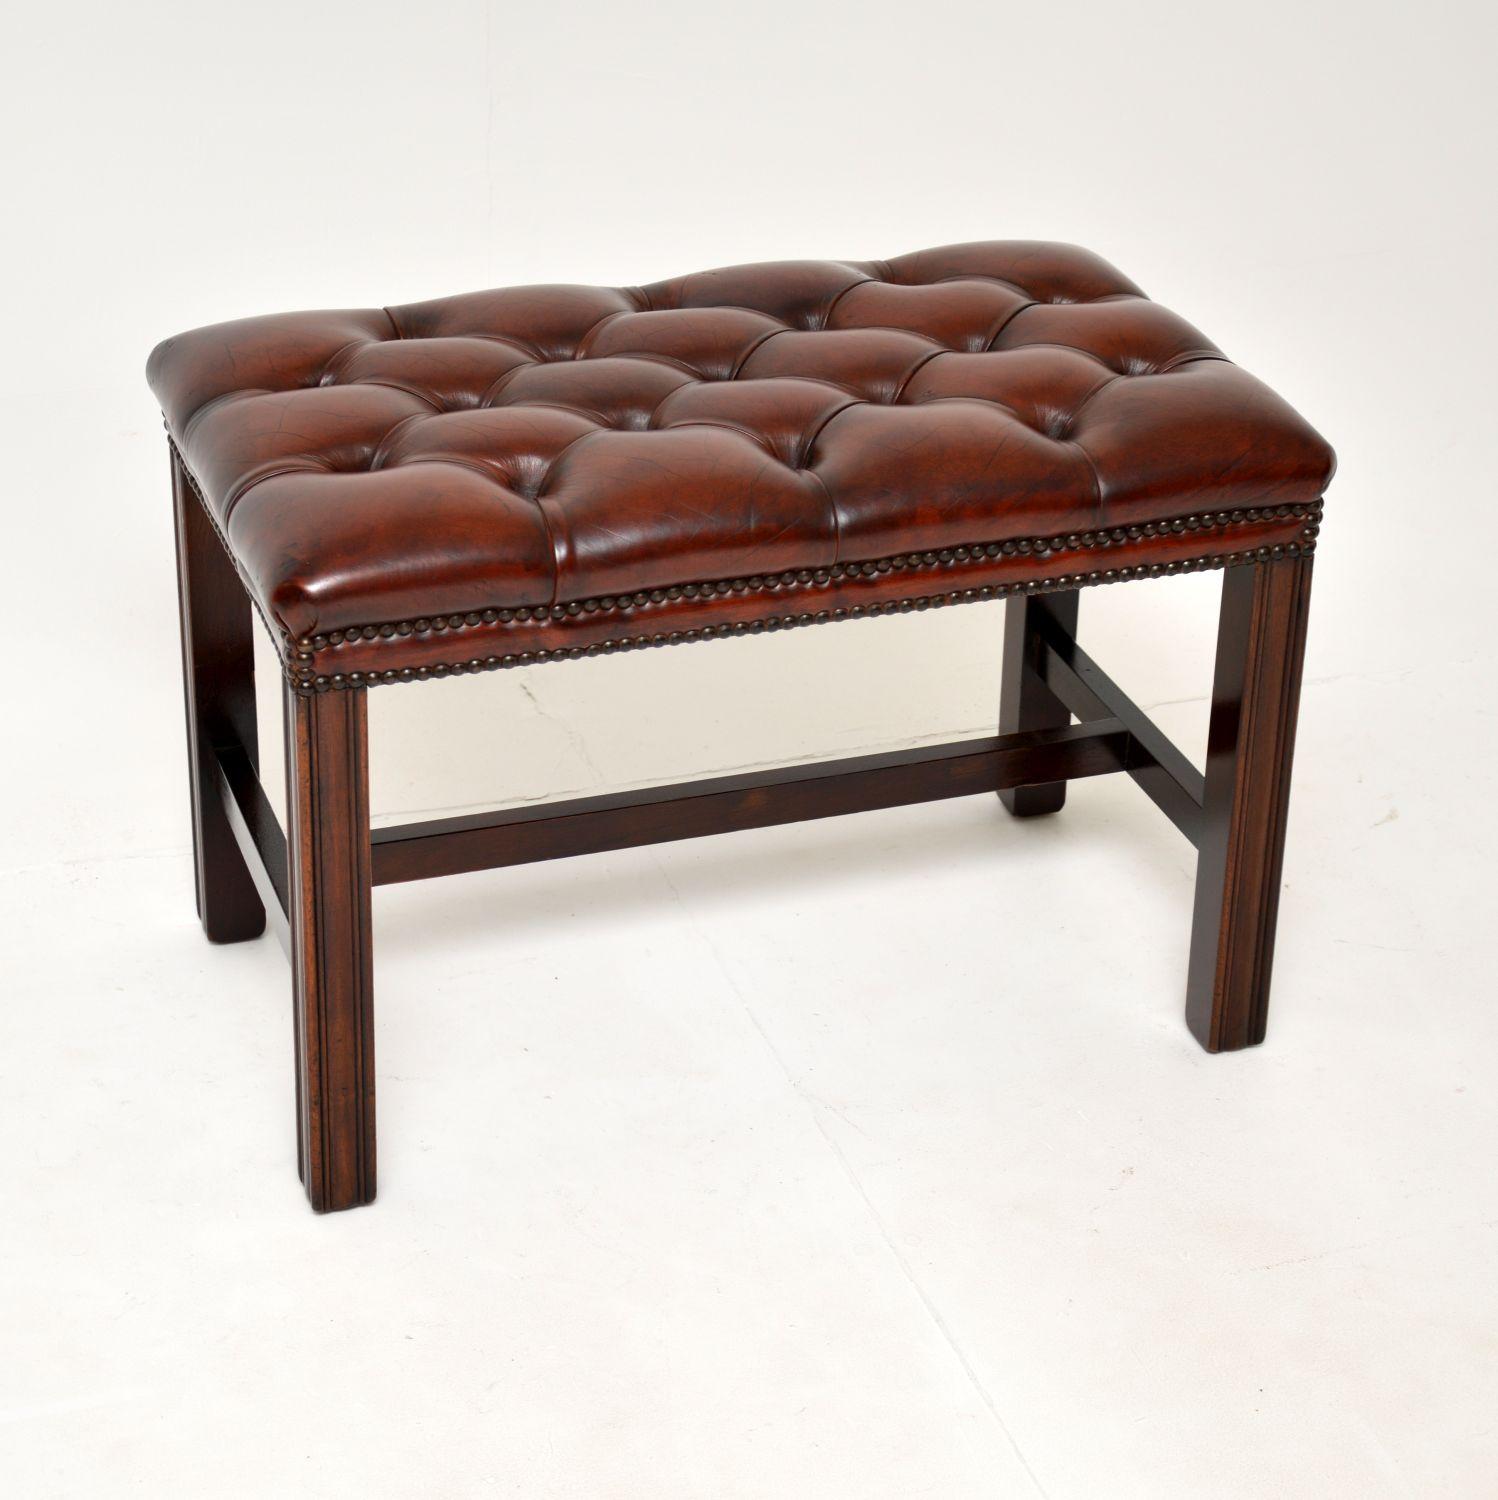 A fantastic antique deep buttoned leather footstool on a wooden base. This is in the classic Georgian style, it was made in England and dates from around the 1920-1930’s period.

It is of super quality and is a very useful size, perfect for use